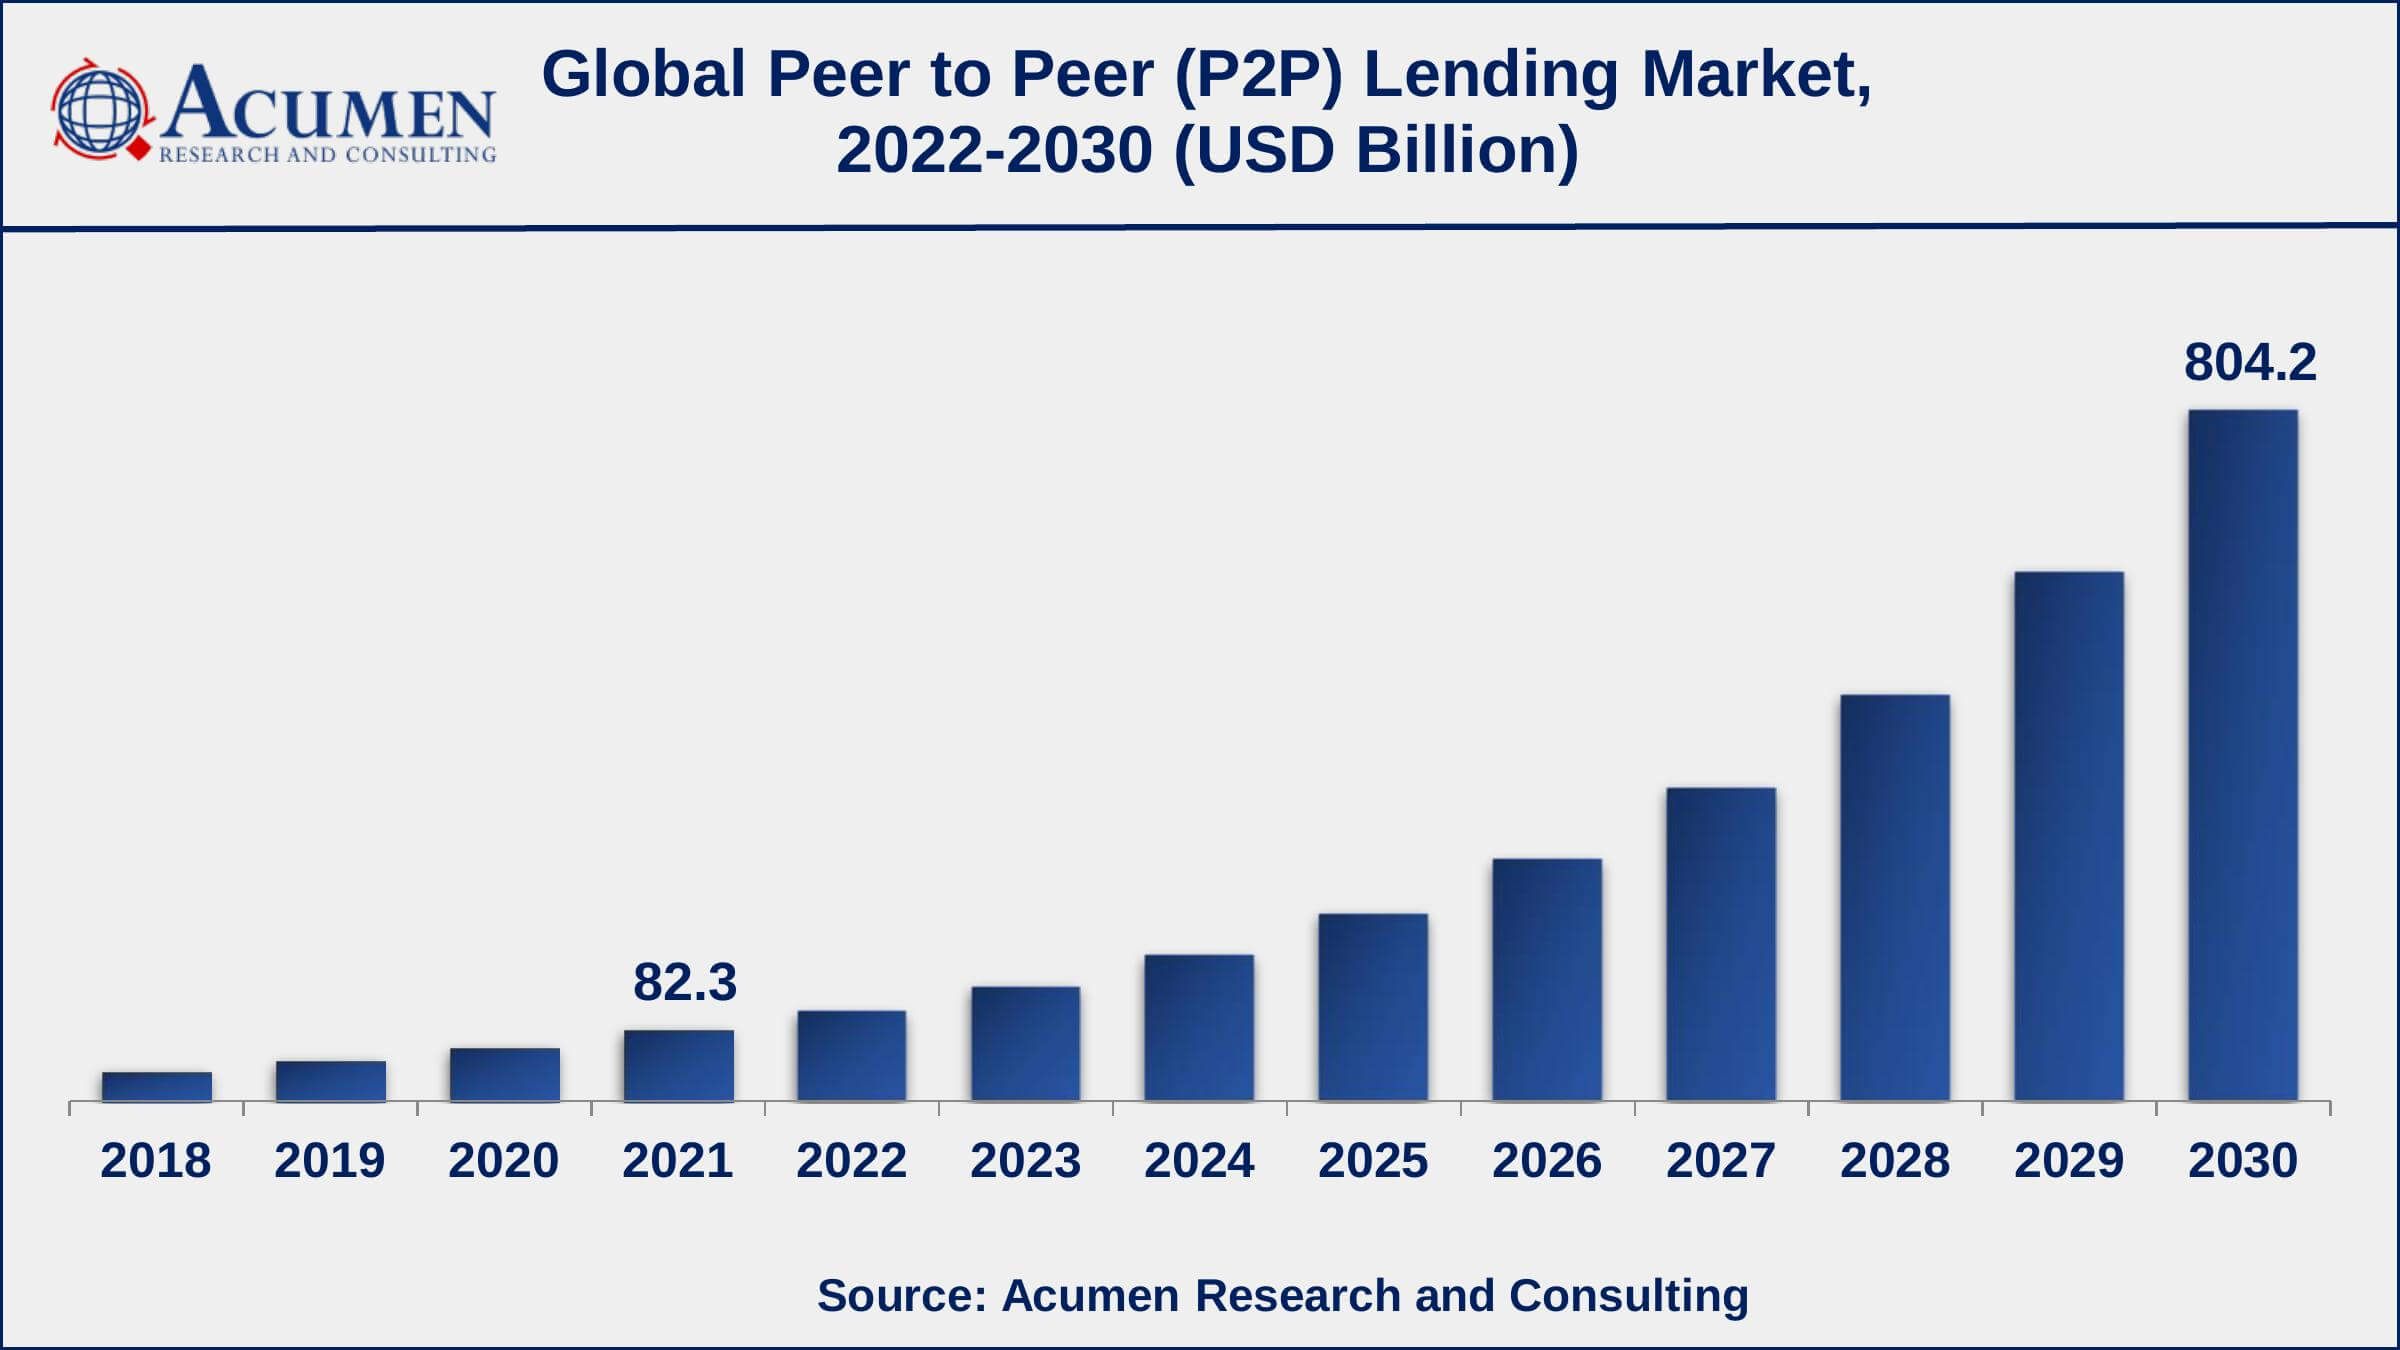 Asia-Pacific peer-to-peer P2P lending market growth will record a CAGR of more than 30% from 2022 to 2030